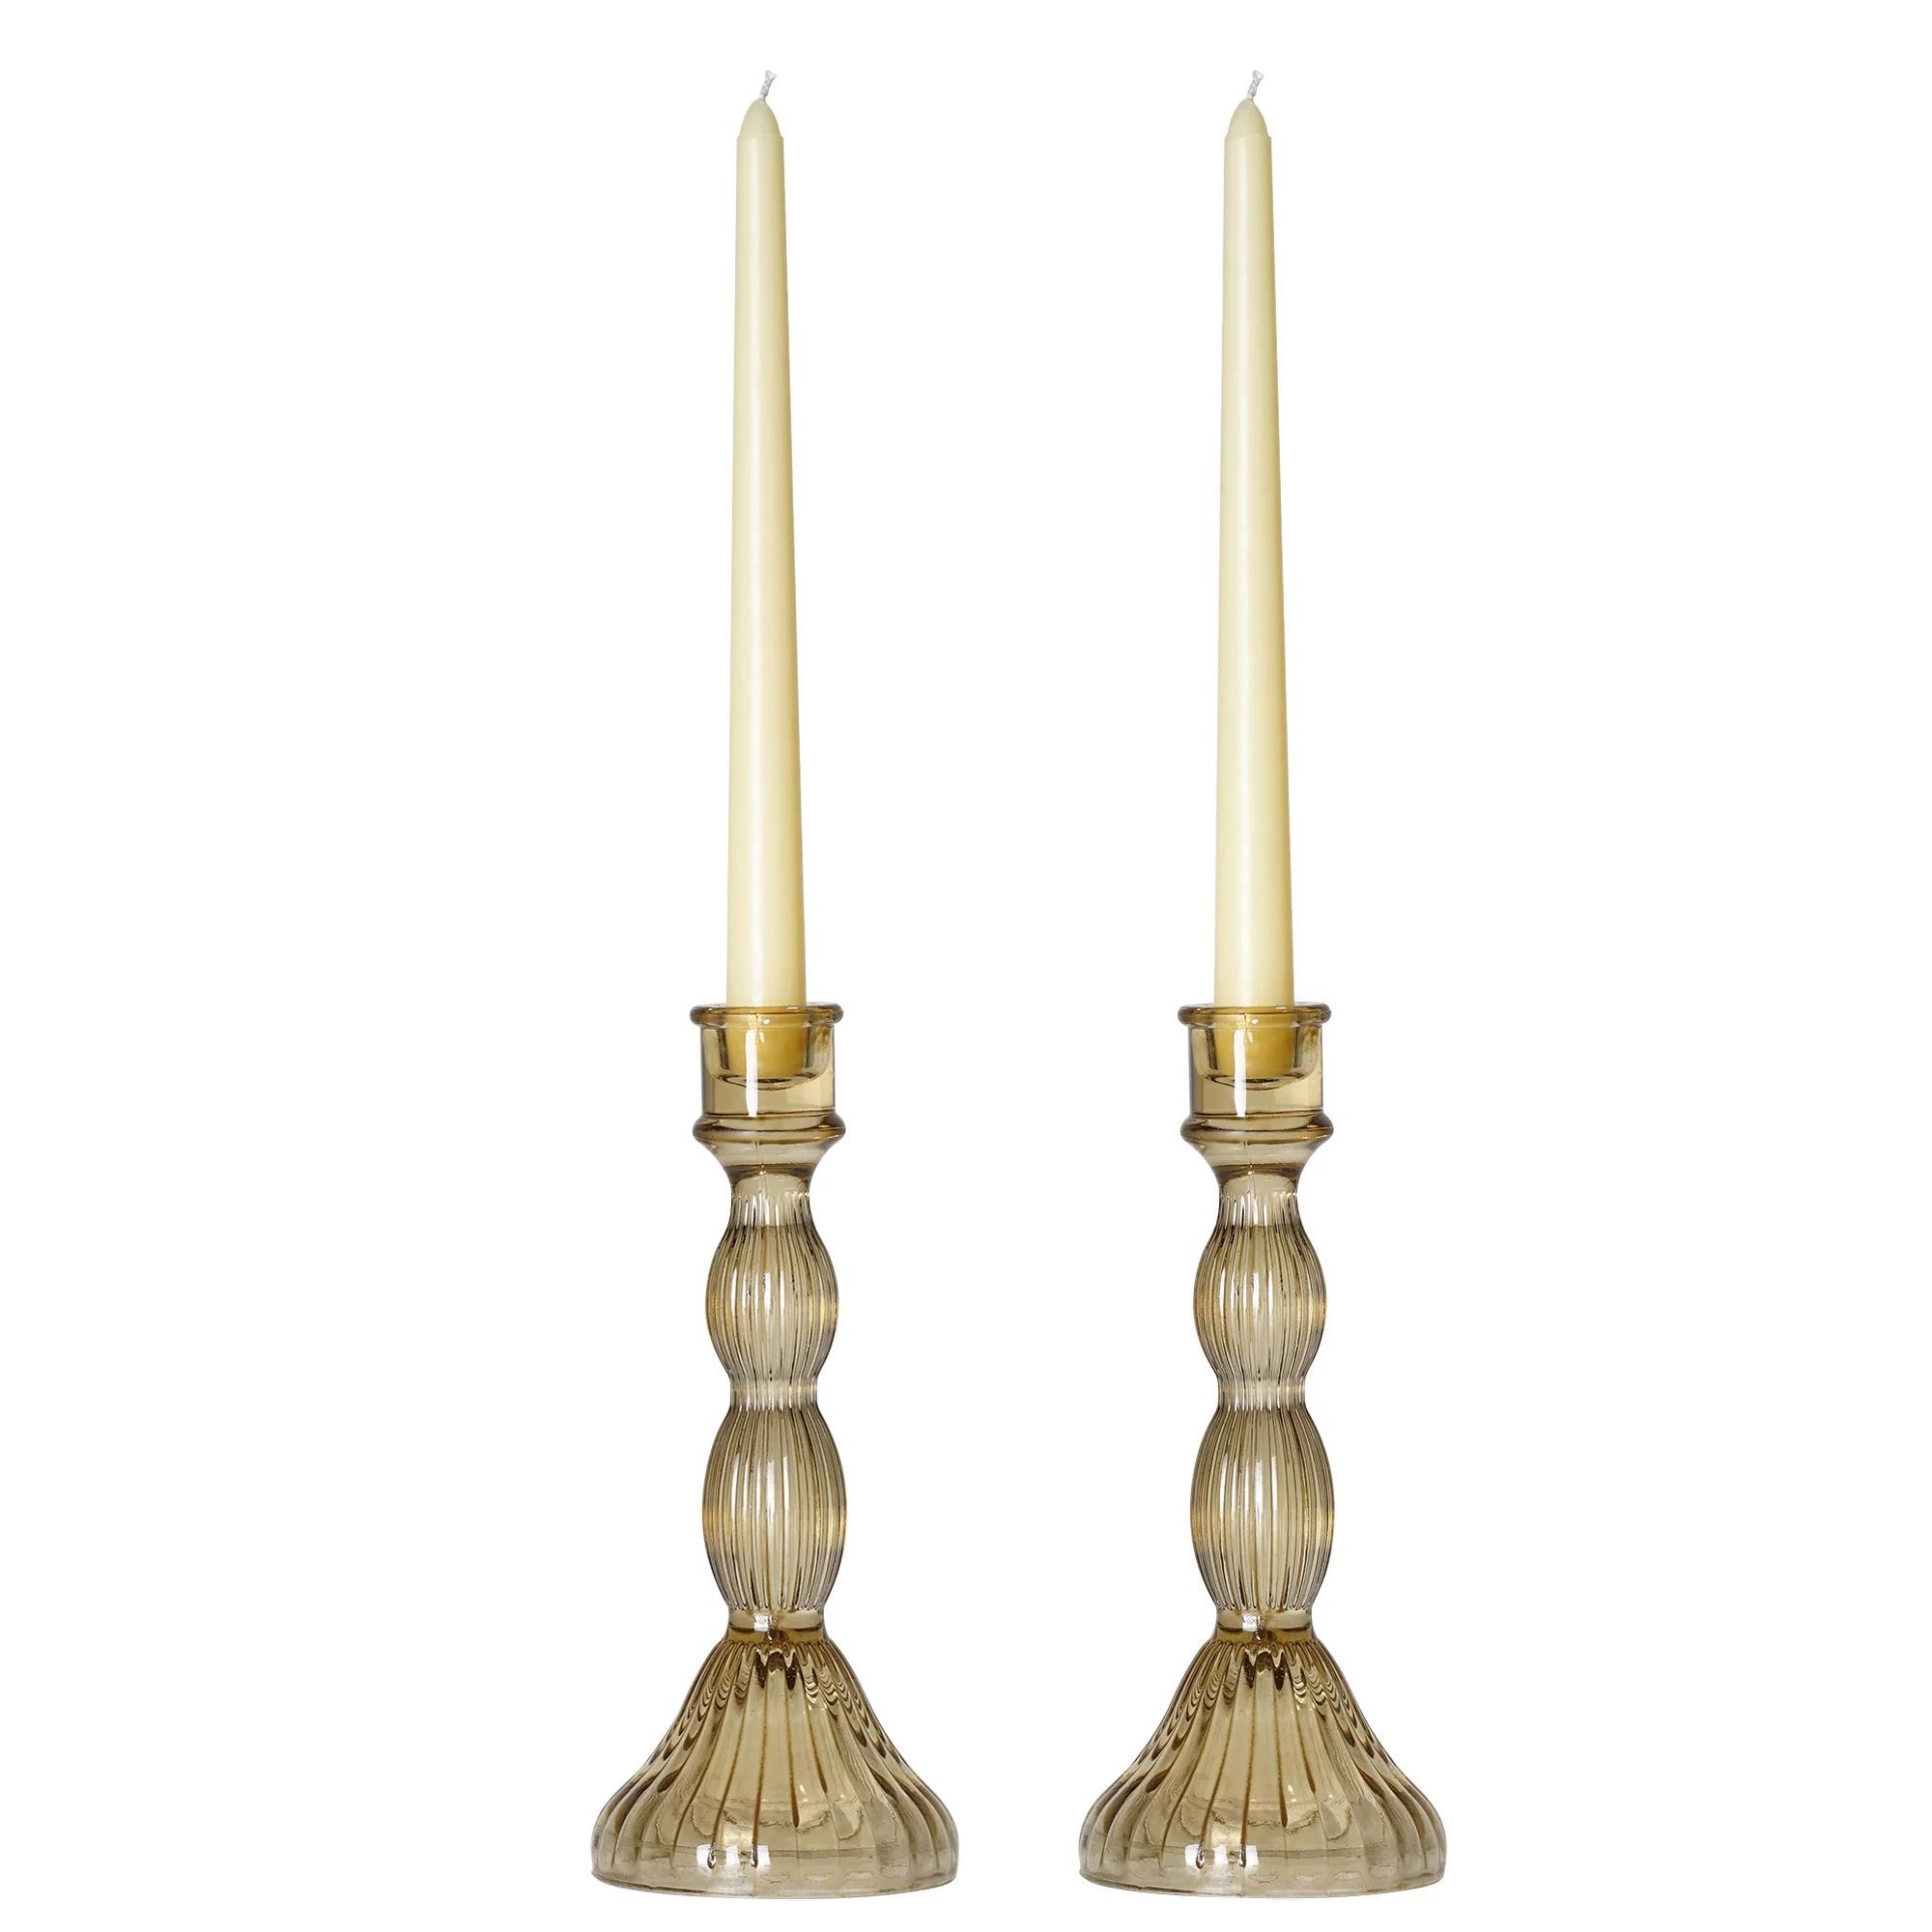 Crystal Art Gallery Traditional Glass Candle Stick Holder Set of 2, Neutrals | Walmart (US)